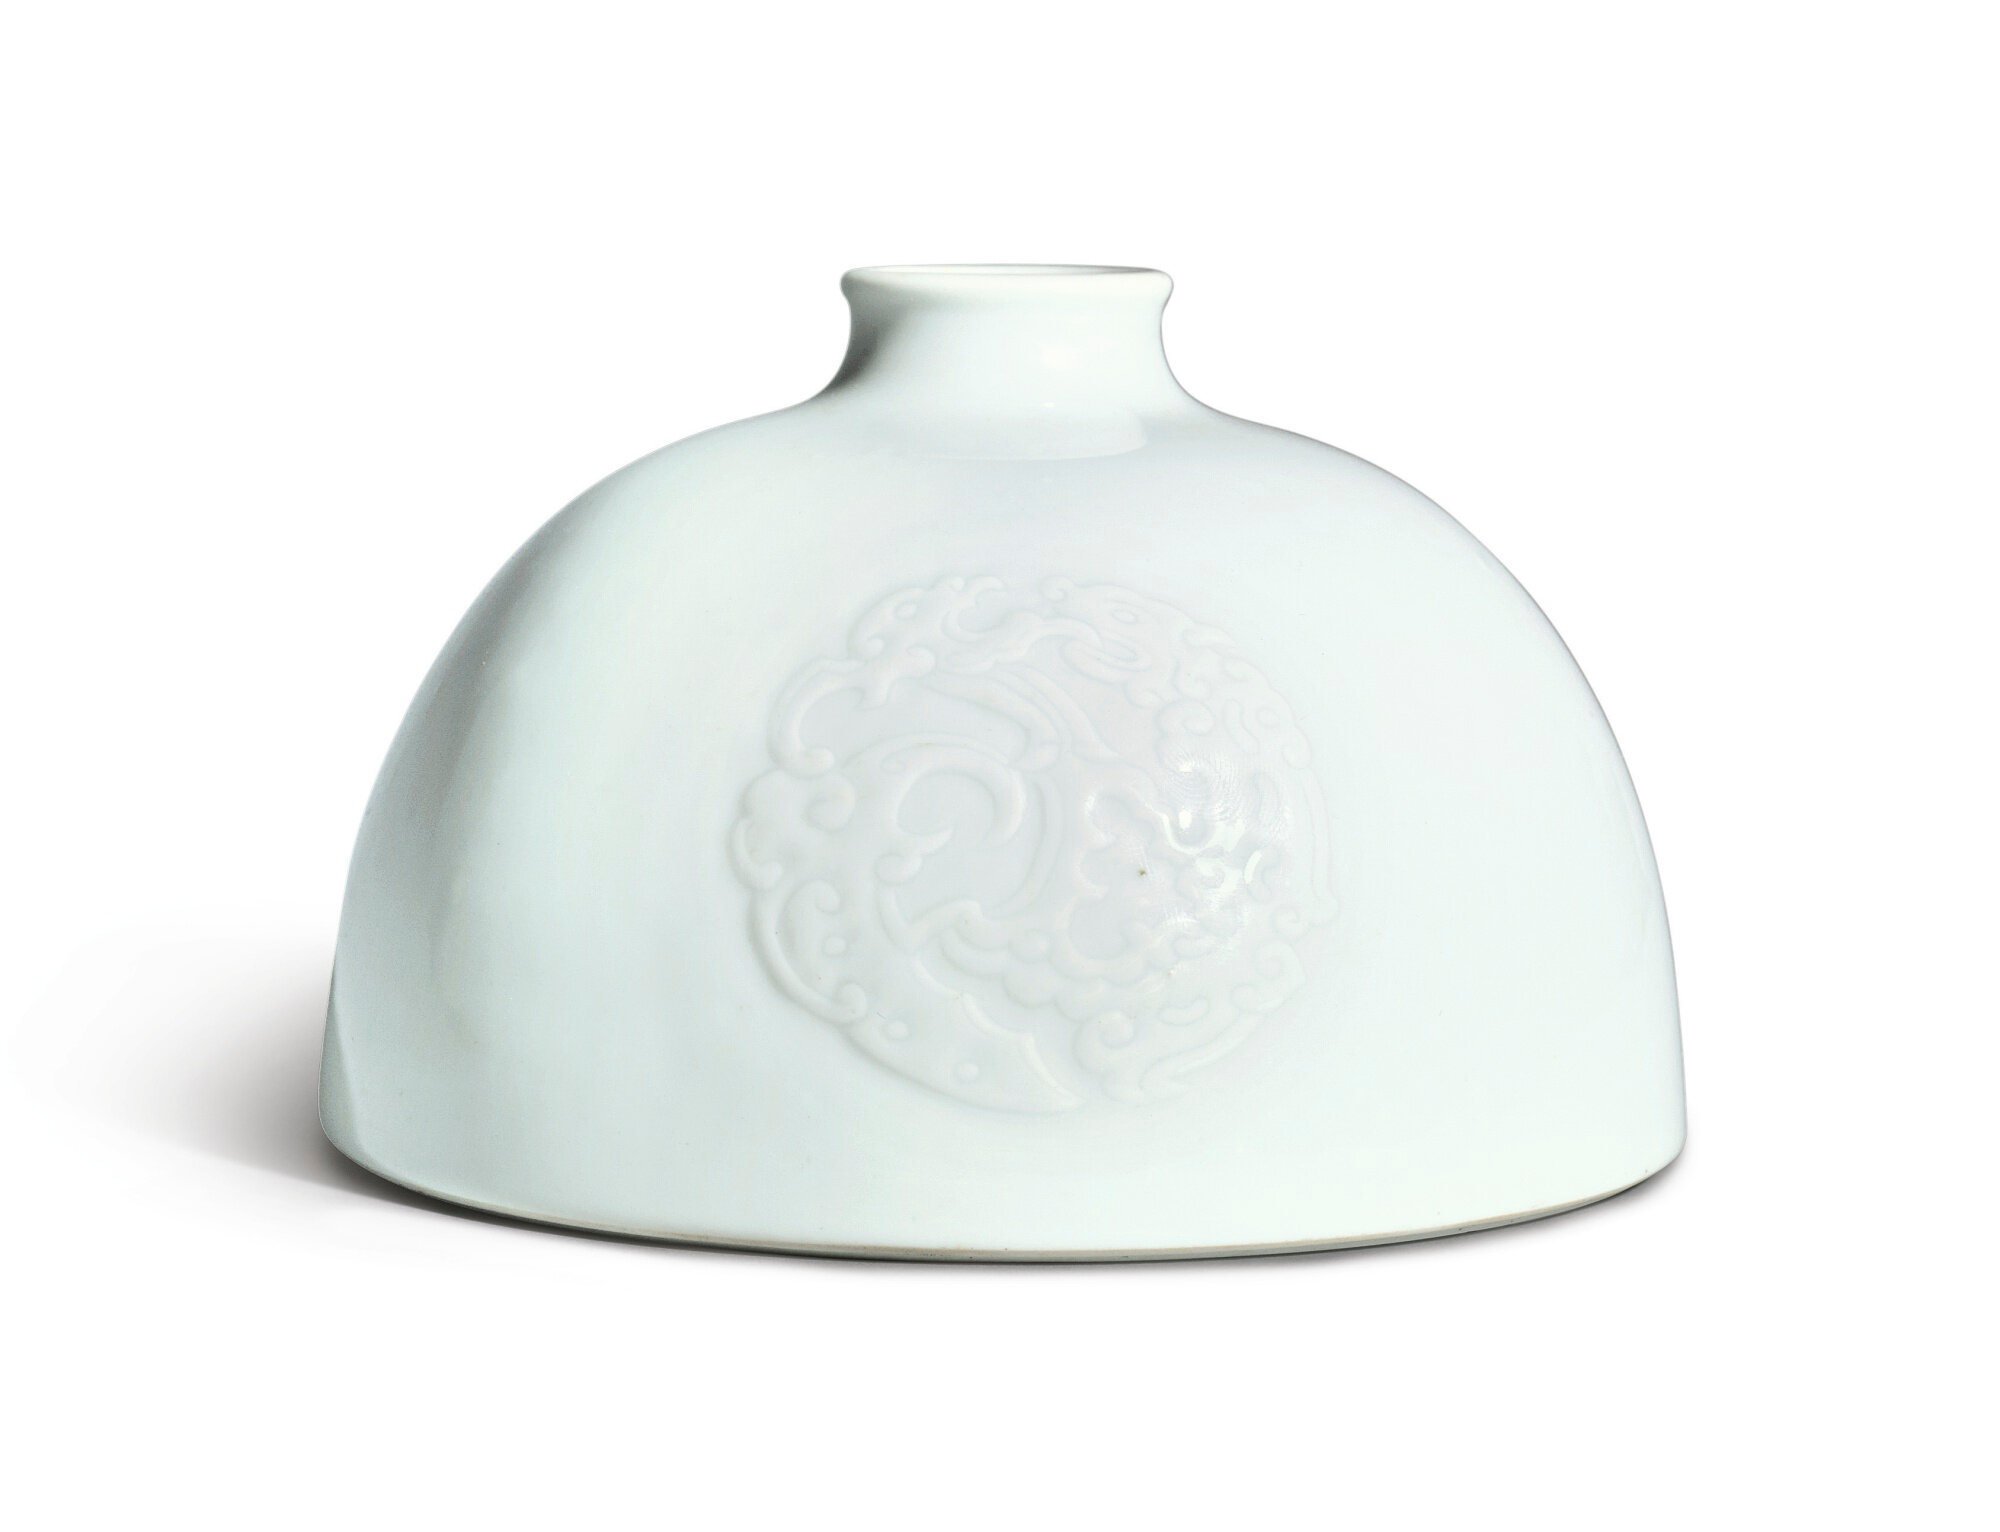 Chinese pottery valuable Collecting guide: